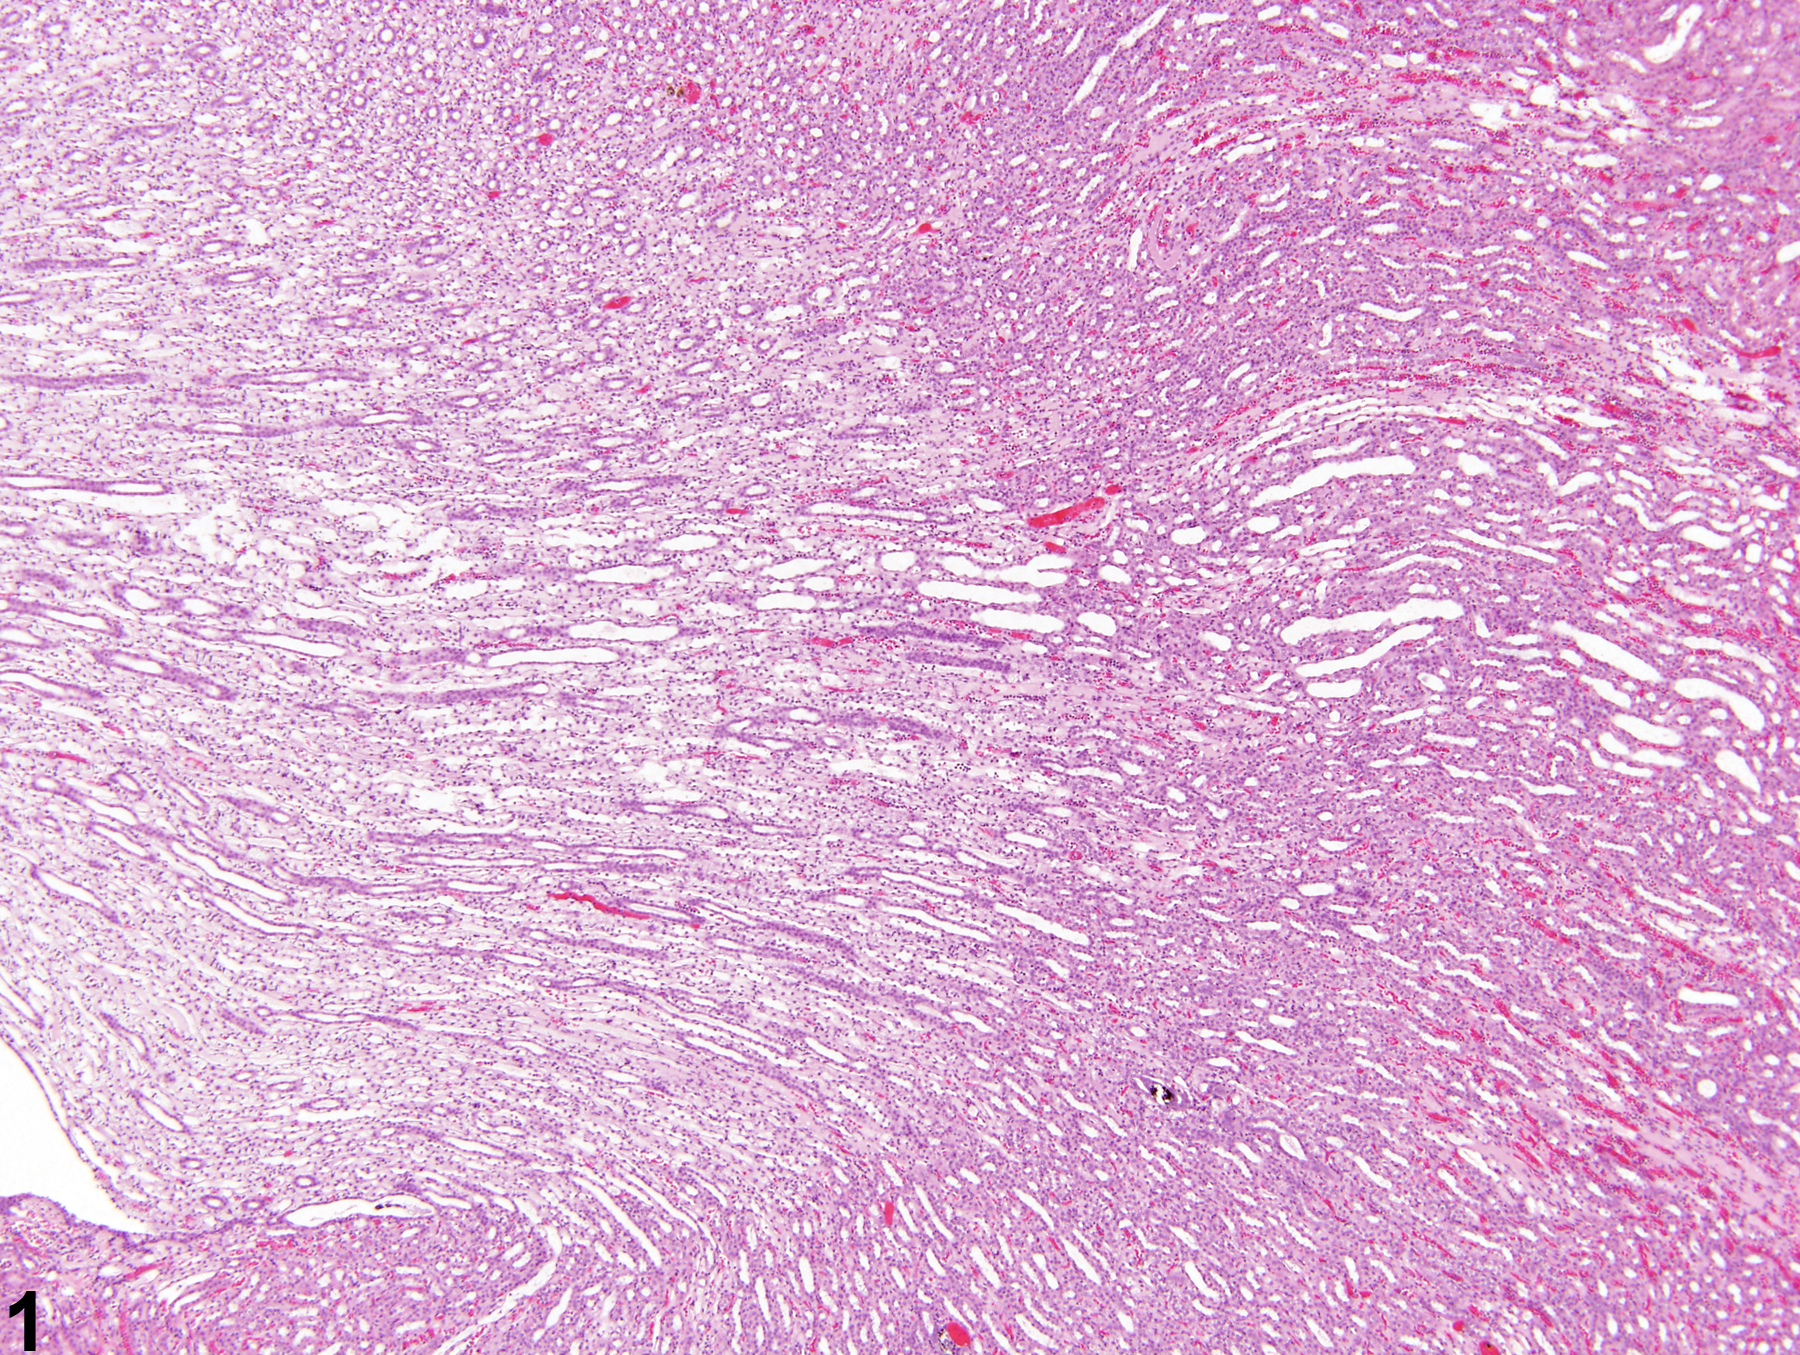 Image of nephropathy, obstructive in the kidney from a female F344/N rat in a chronic study